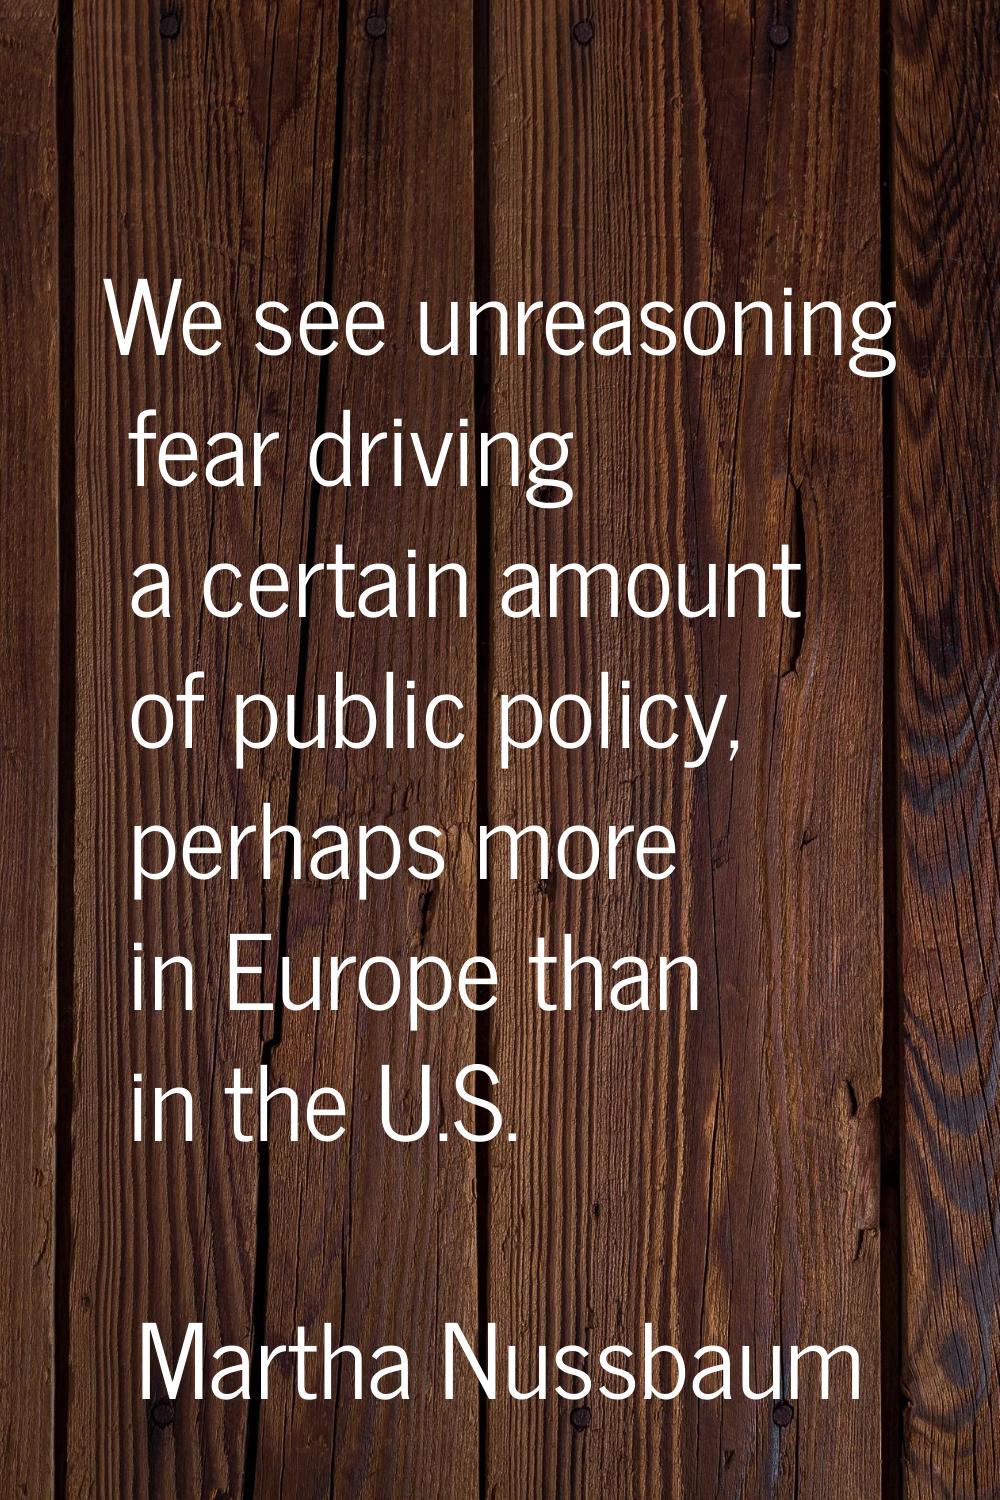 We see unreasoning fear driving a certain amount of public policy, perhaps more in Europe than in t